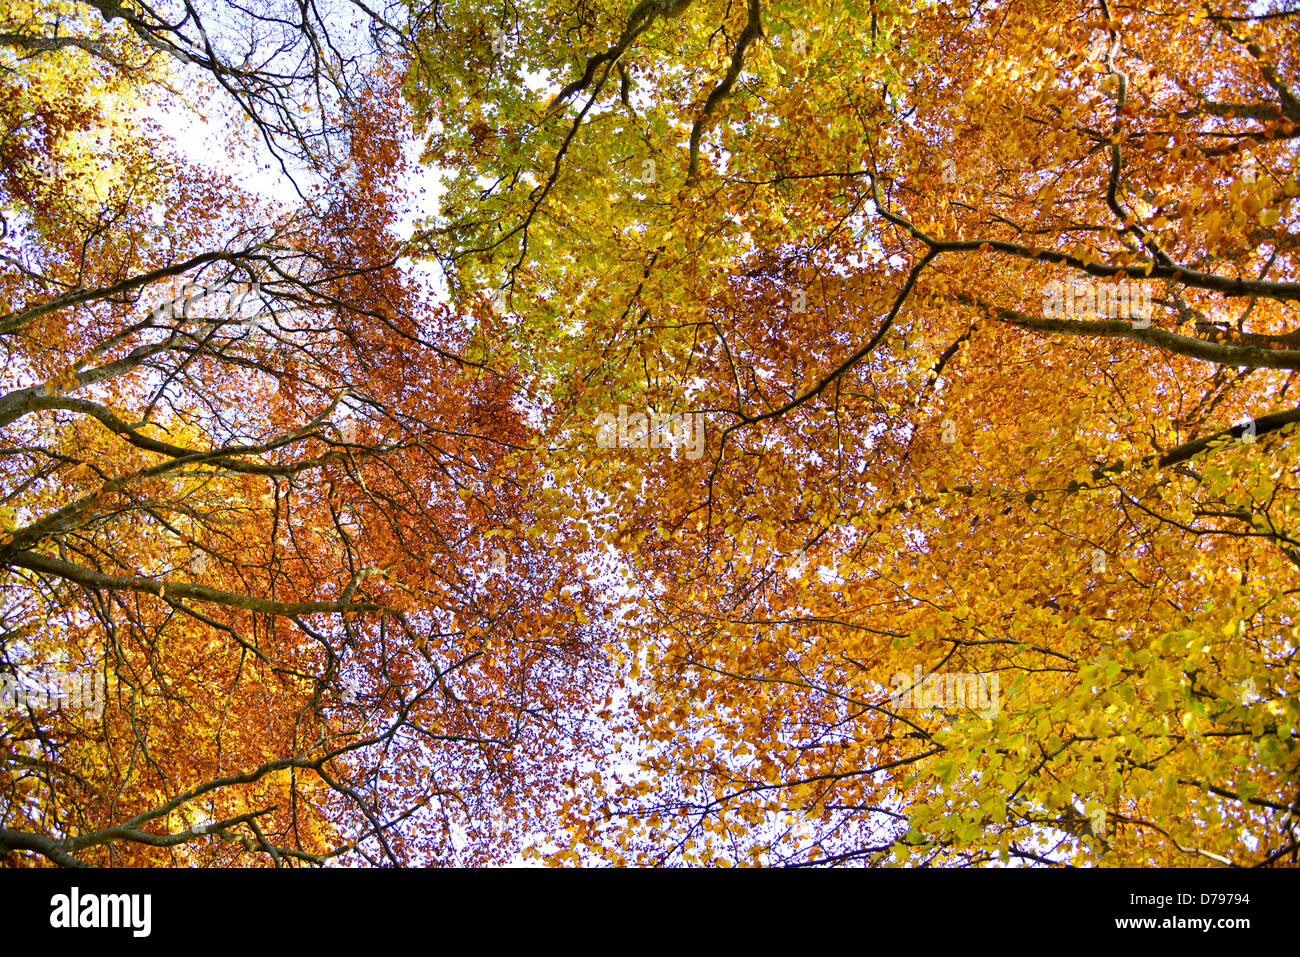 Looking up through colourful autumn leaves and branches. Crieff Perthsire Scotland UK Stock Photo